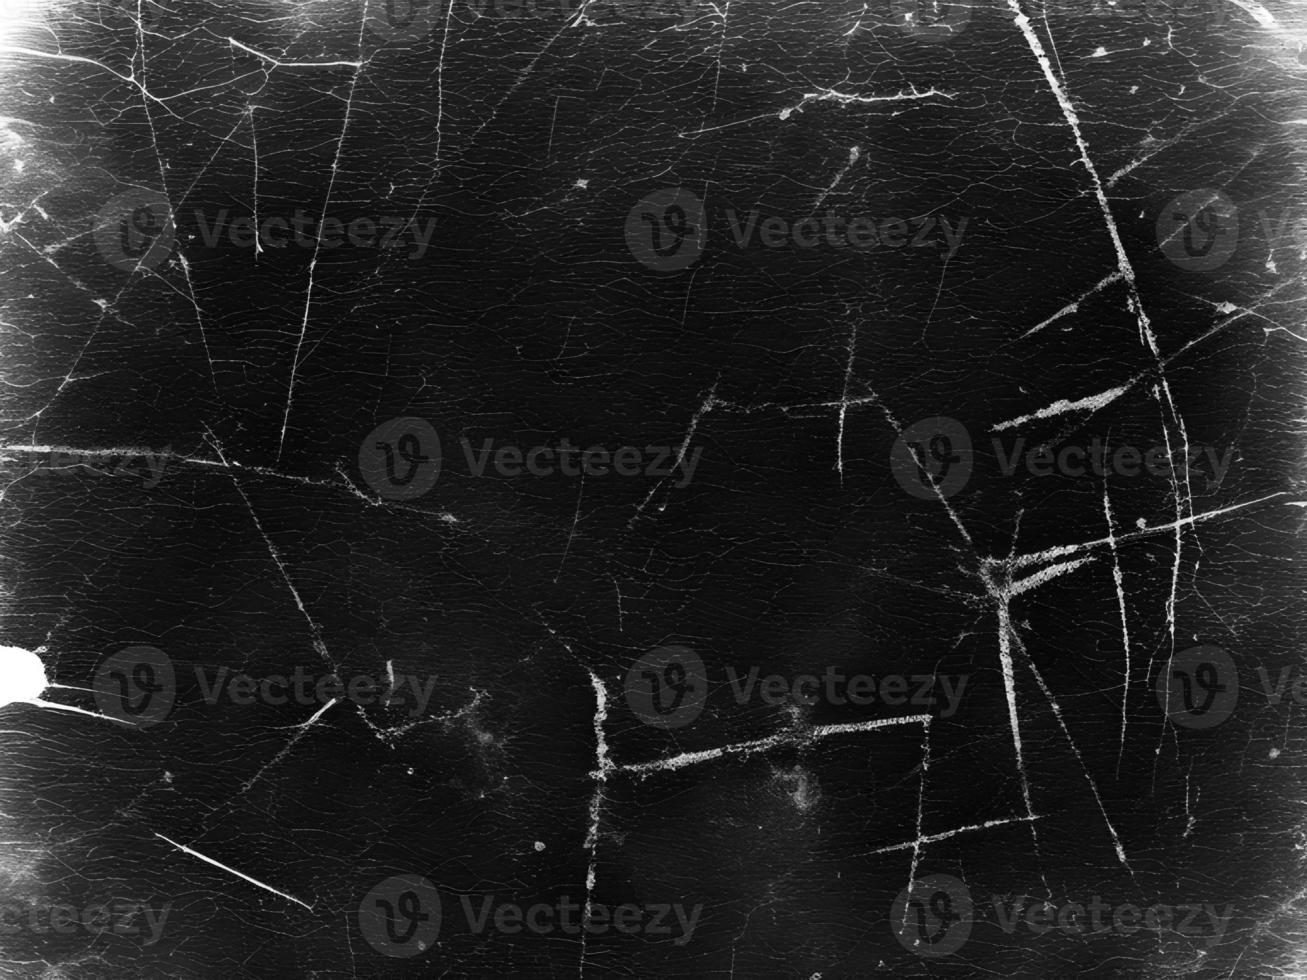 Vintage Black Scratched Grunge Background with Old Film Effect - Abstract Dark Texture for Design and Art - Retro Distressed Weathered Worn Eroded Decay Monochrome Backdrop photo